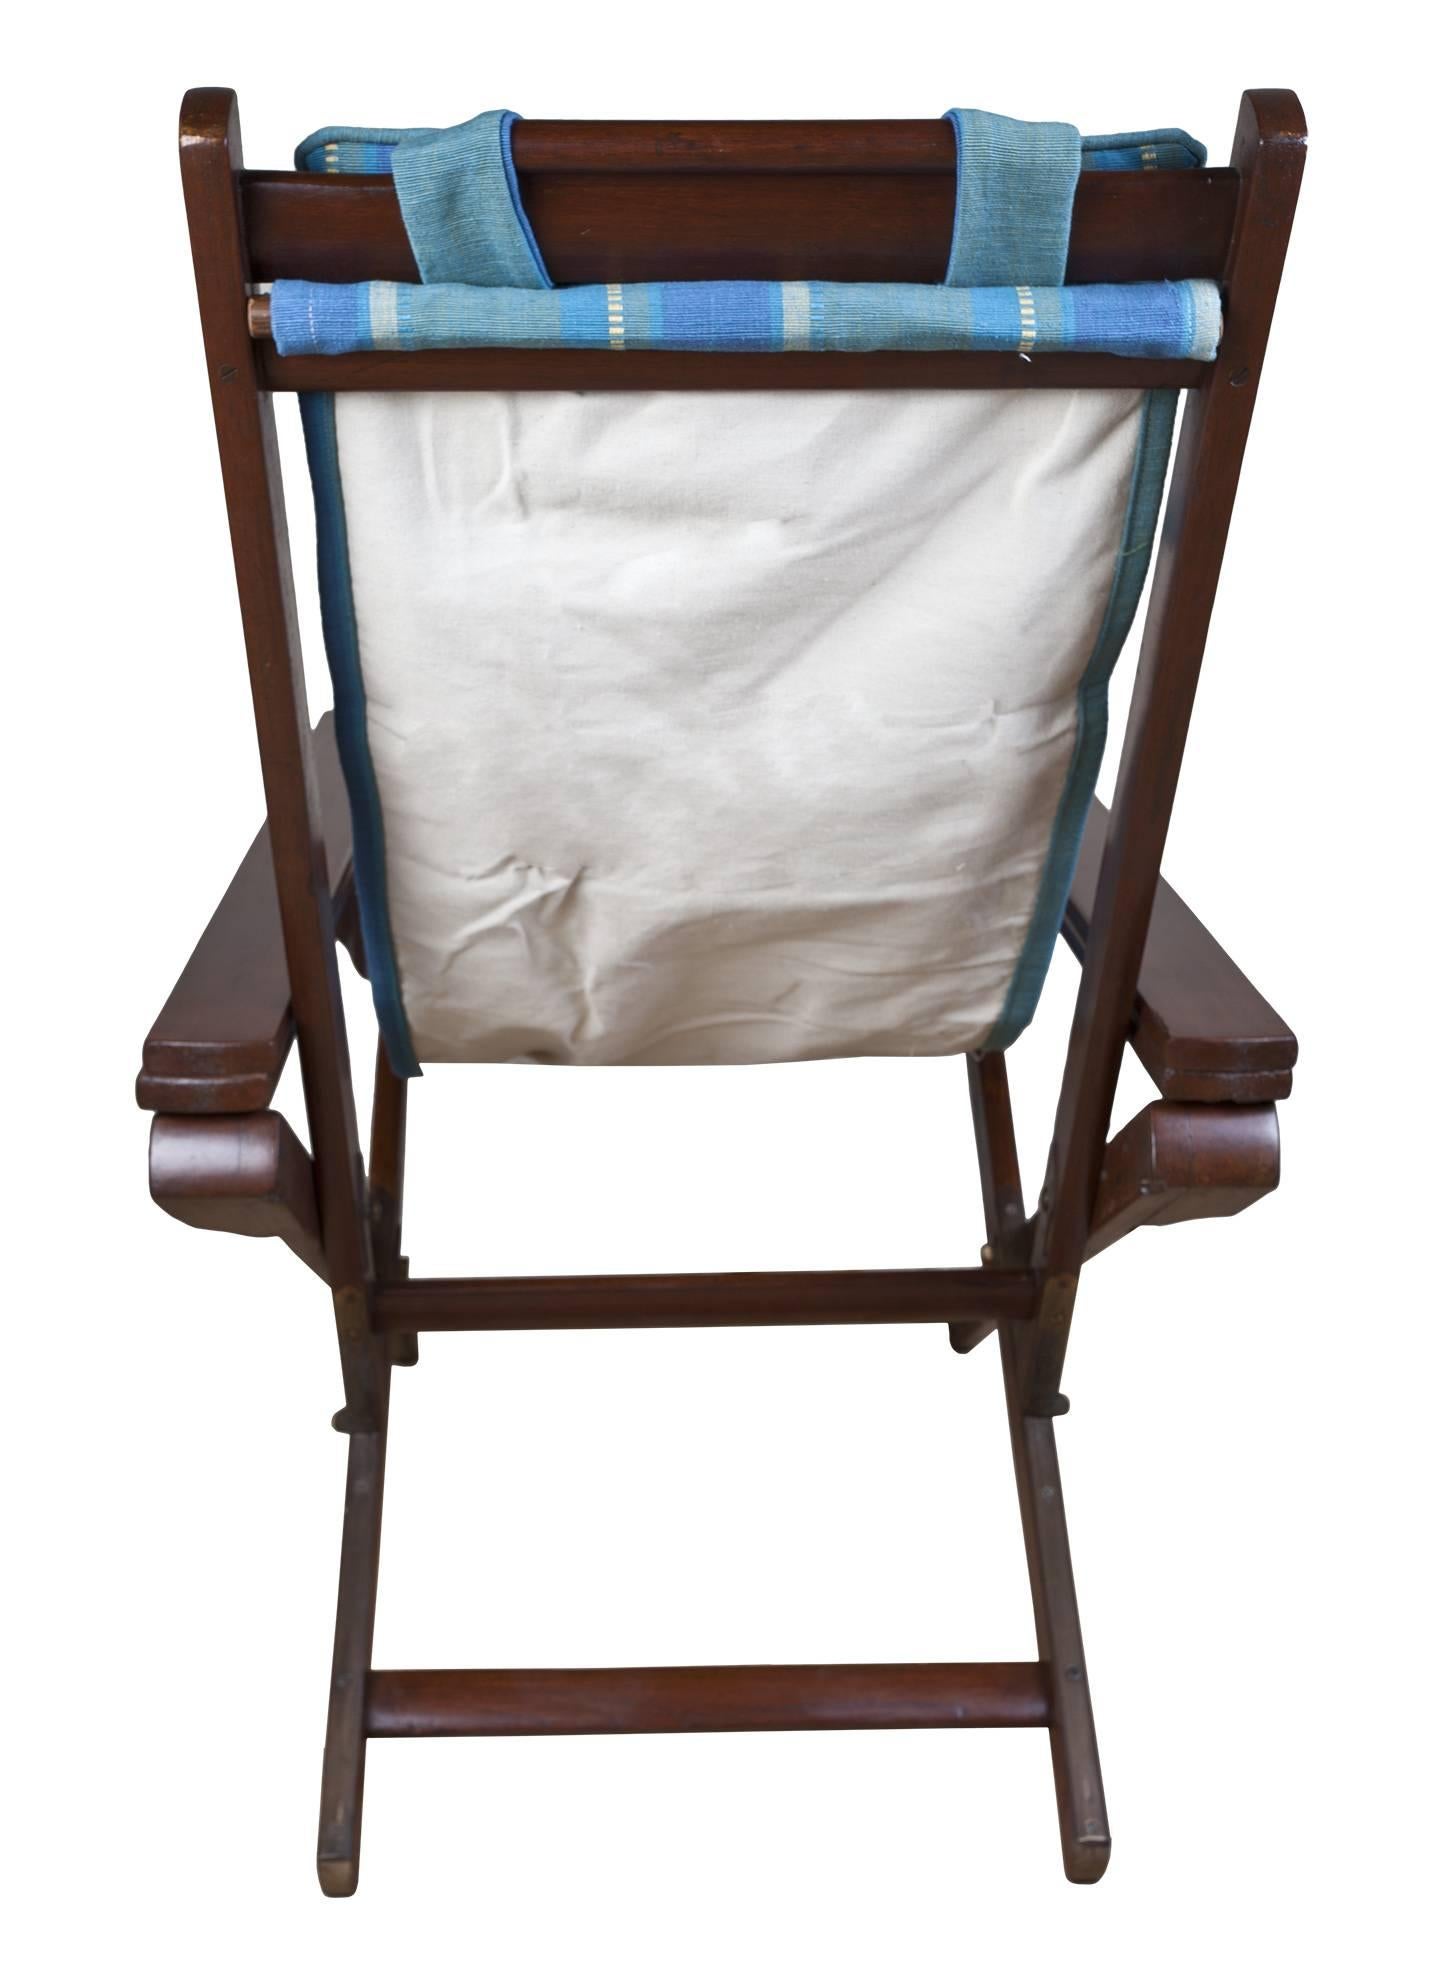 Canvas Pair of British Campaign Folding and Adjustable Chairs with Extendable Leg Rests